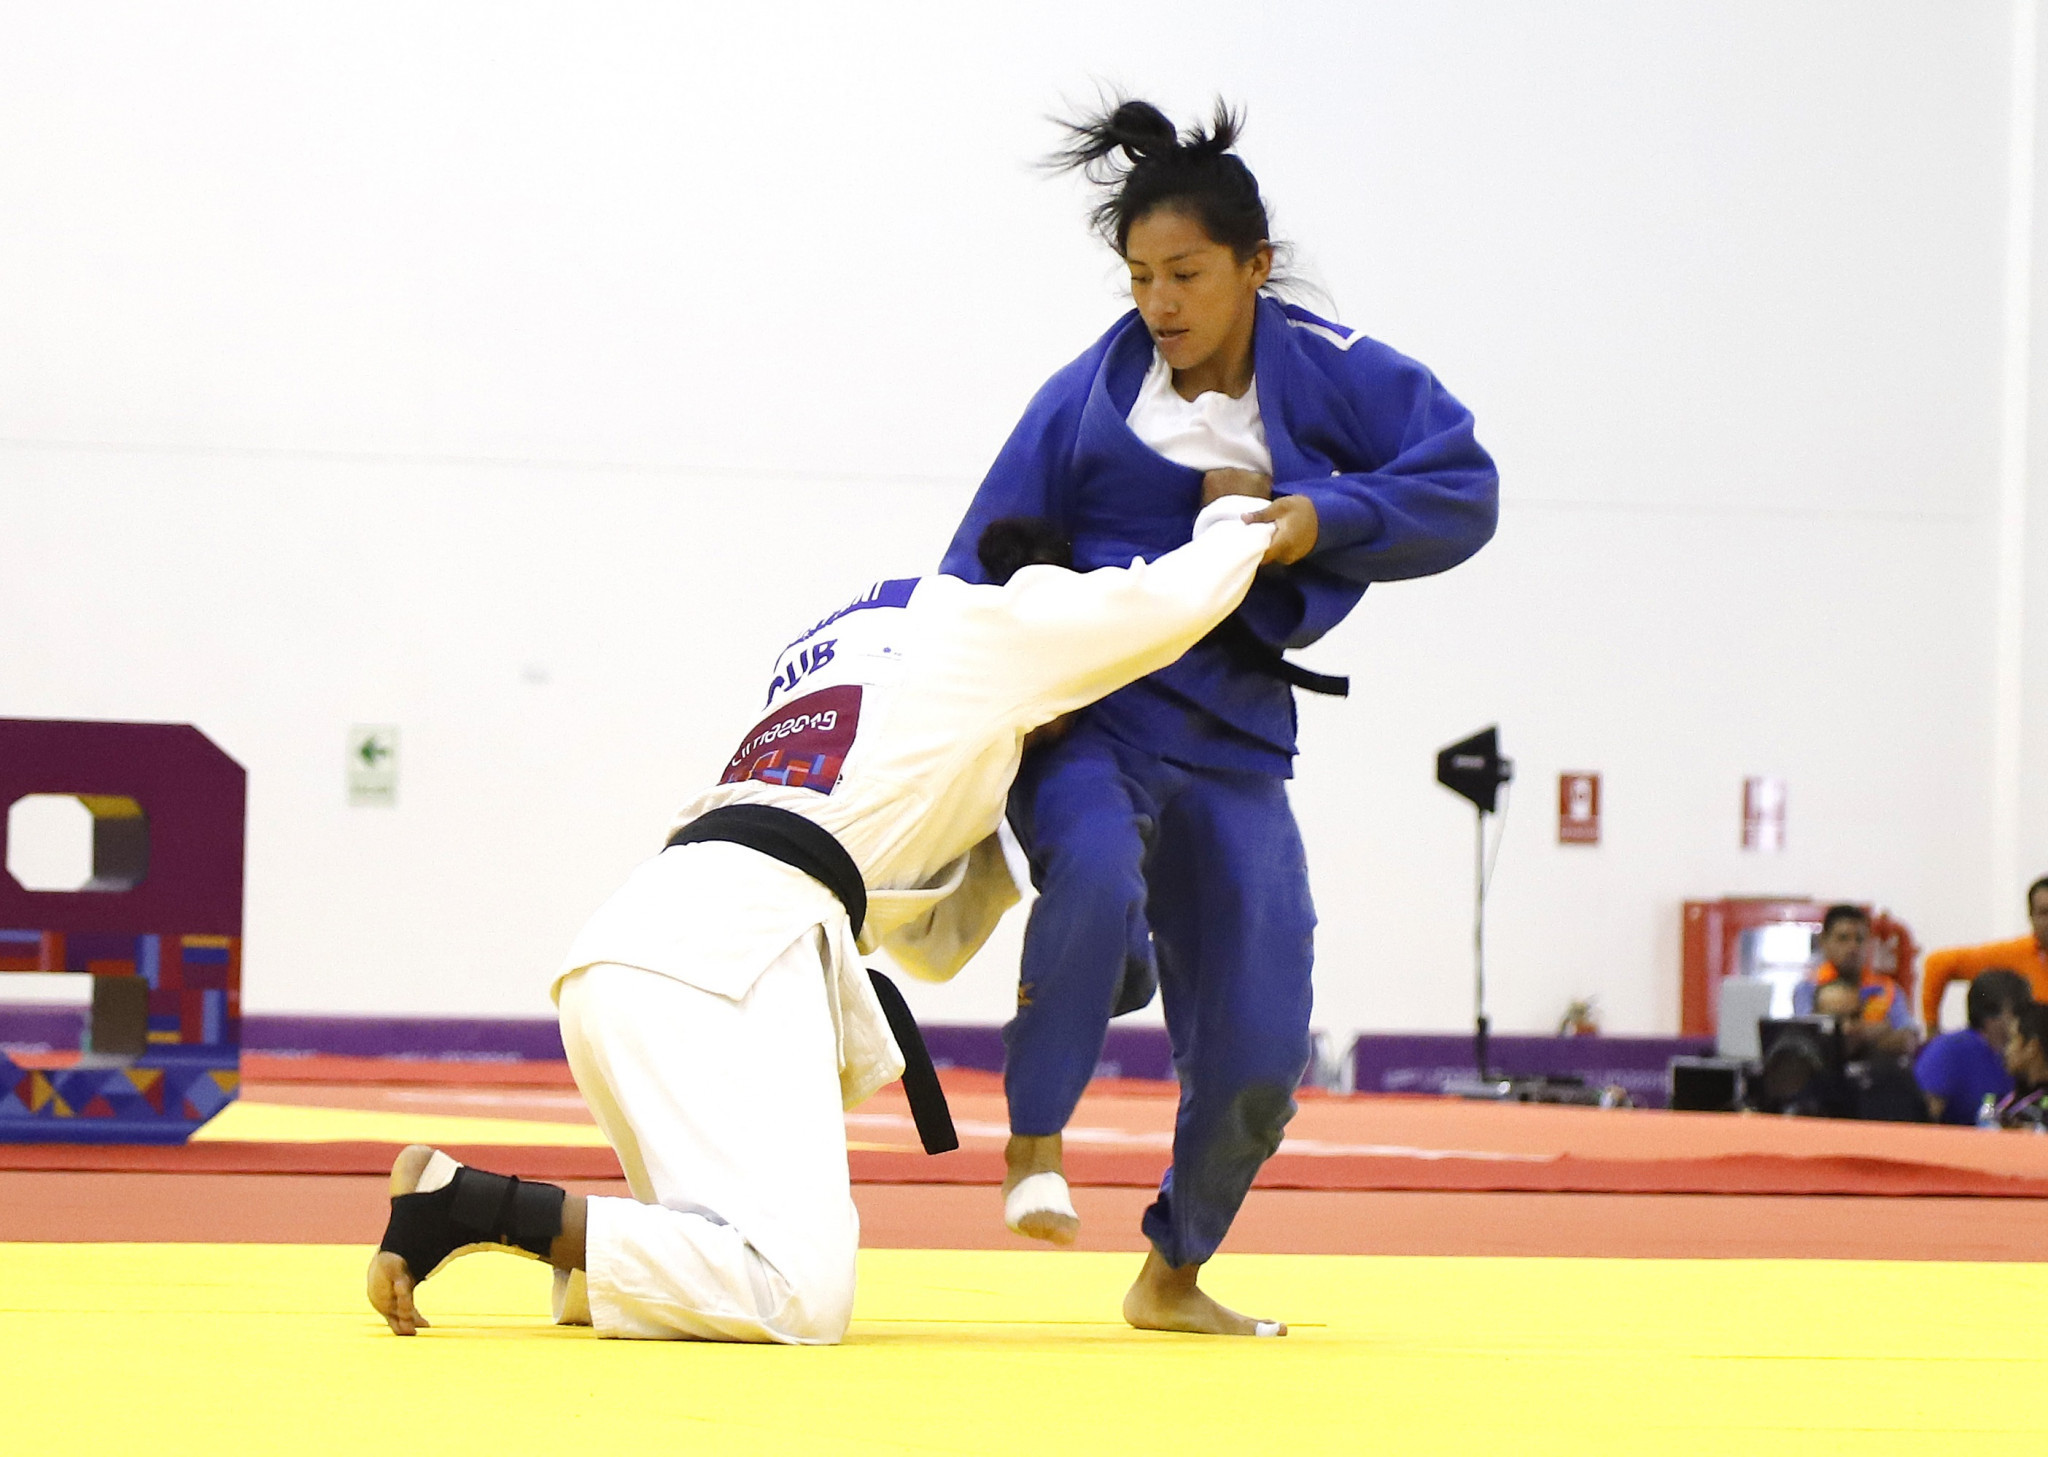 The 2019 Pan American Senior Judo Championships in Lima provided a prime opportunity for organisers to fine-tune preparations for this year's Pan American Games ©Lima 2019